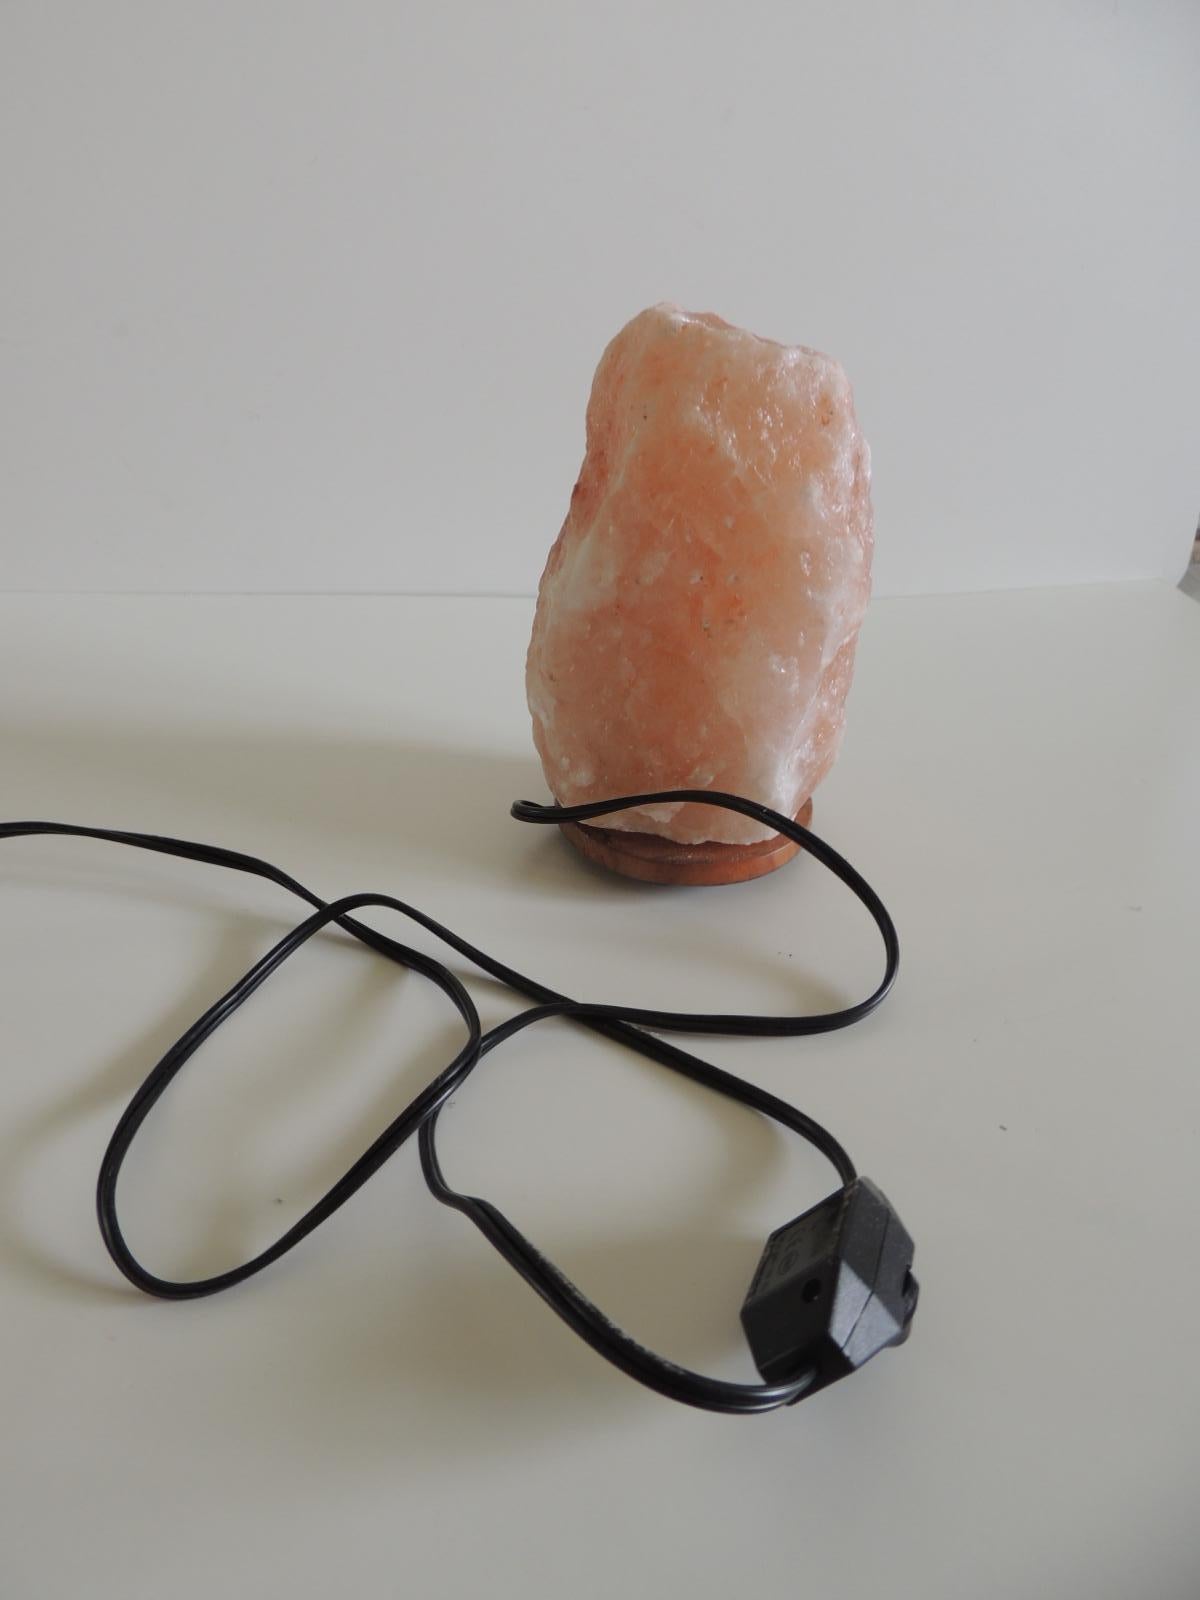 Modern pink rock salt light, with round wood base
and on/off switch. And dimmer on plugging cord.
Size: 5